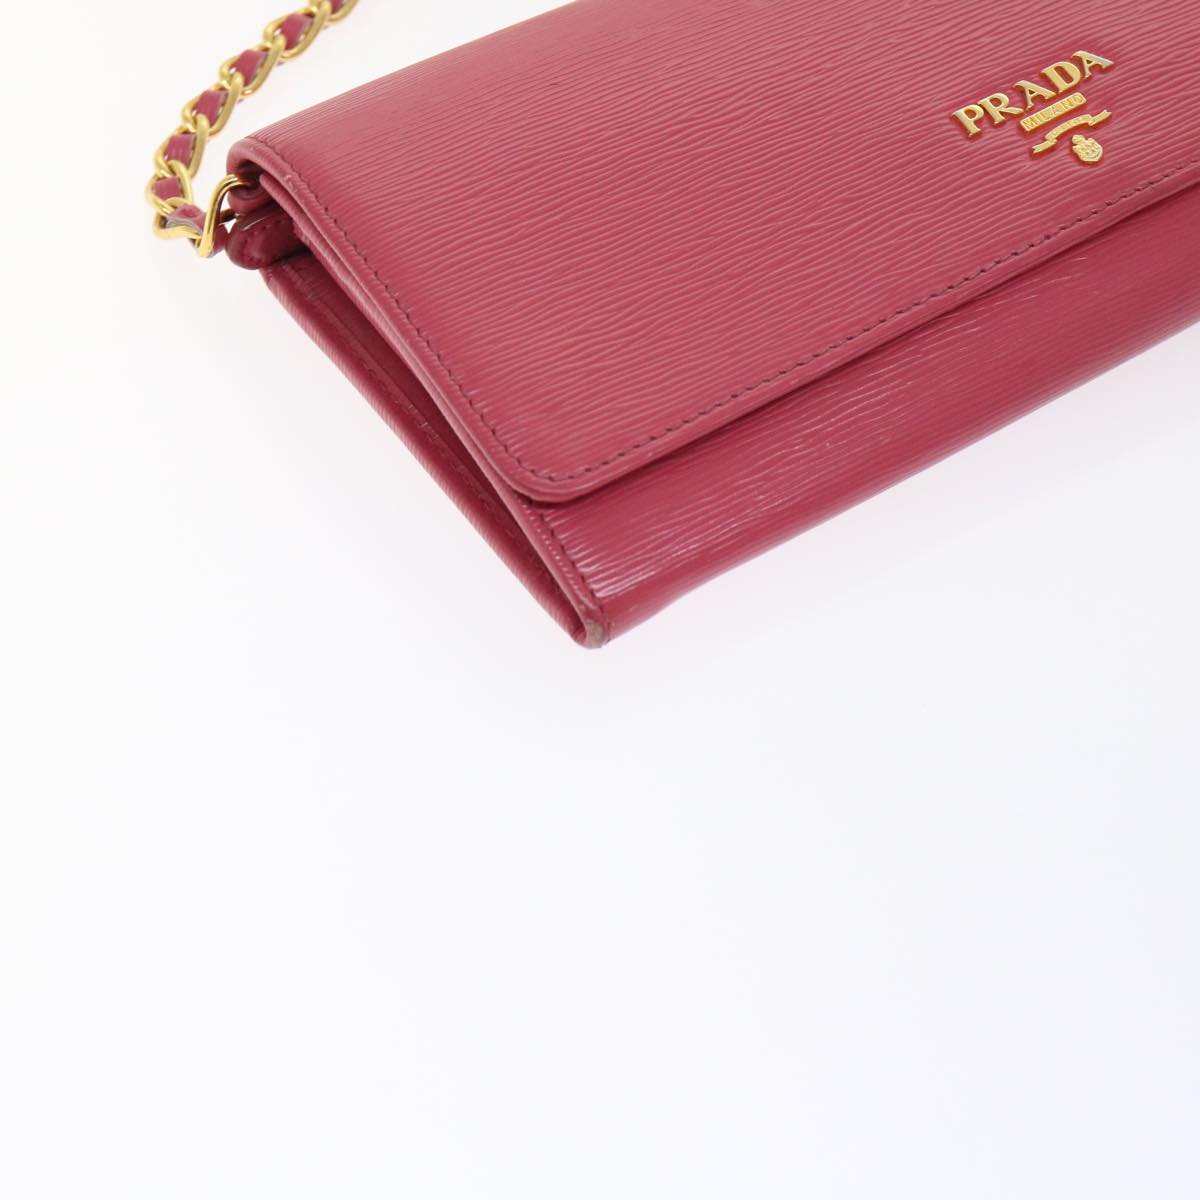 PRADA Chain Wallet Leather Pink Auth am4960